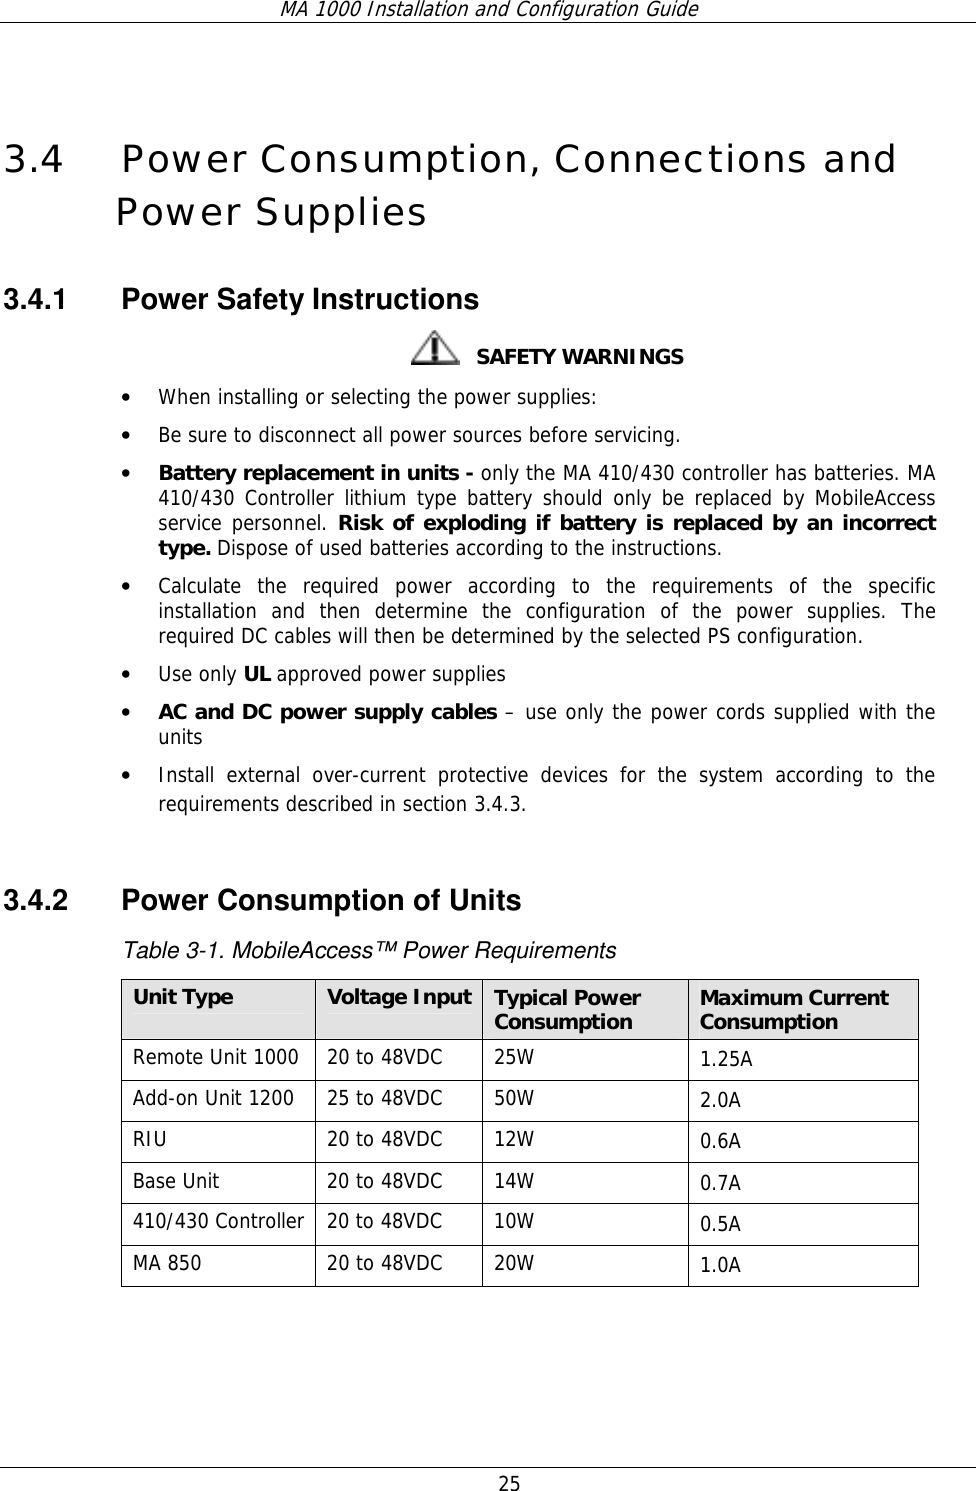 MA 1000 Installation and Configuration Guide  25  3.4 Power Consumption, Connections and Power Supplies 3.4.1 Power Safety Instructions    SAFETY WARNINGS • When installing or selecting the power supplies:  • Be sure to disconnect all power sources before servicing. • Battery replacement in units - only the MA 410/430 controller has batteries. MA 410/430 Controller lithium type battery should only be replaced by MobileAccess service personnel. Risk of exploding if battery is replaced by an incorrect type. Dispose of used batteries according to the instructions. • Calculate the required power according to the requirements of the specific installation and then determine the configuration of the power supplies. The required DC cables will then be determined by the selected PS configuration. • Use only UL approved power supplies  • AC and DC power supply cables – use only the power cords supplied with the units  • Install external over-current protective devices for the system according to the requirements described in section  3.4.3.  3.4.2  Power Consumption of Units Table  3-1. MobileAccess™ Power Requirements Unit Type  Voltage Input Typical Power Consumption  Maximum Current Consumption Remote Unit 1000  20 to 48VDC  25W  1.25A Add-on Unit 1200  25 to 48VDC  50W  2.0A RIU 20 to 48VDC 12W  0.6A Base Unit  20 to 48VDC  14W  0.7A 410/430 Controller  20 to 48VDC  10W  0.5A MA 850  20 to 48VDC  20W  1.0A  